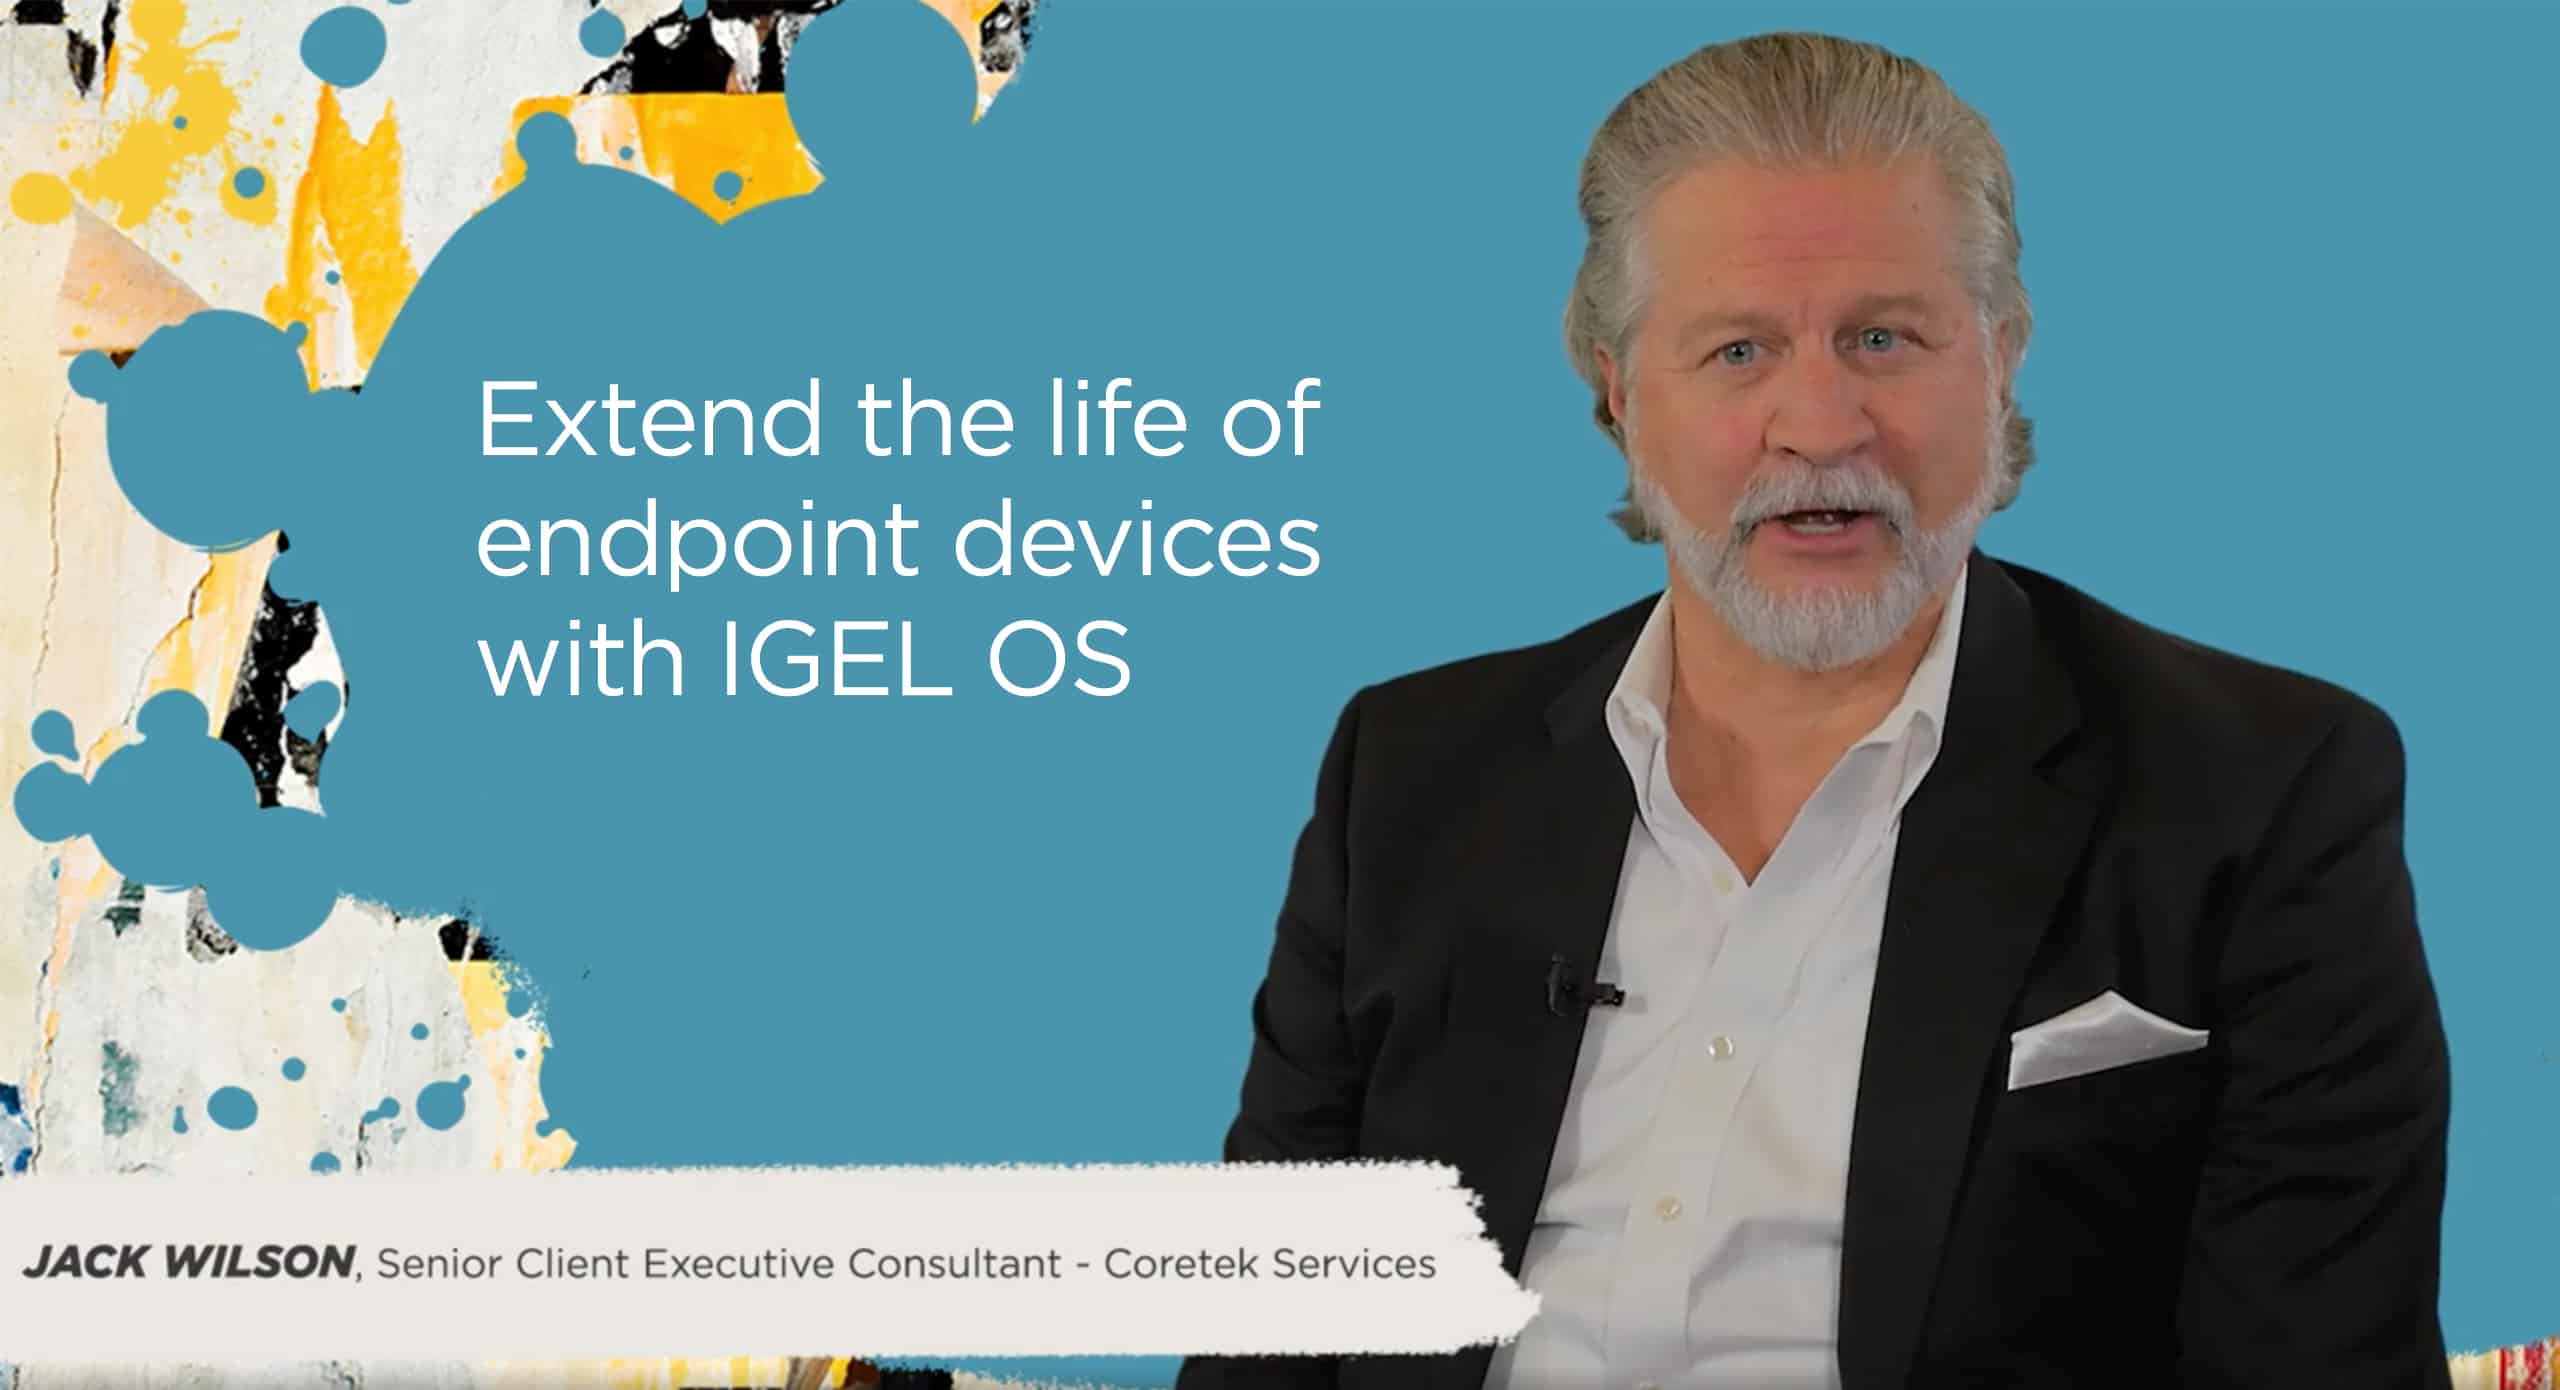 Extend the life of endpoint devices with IGEL OS